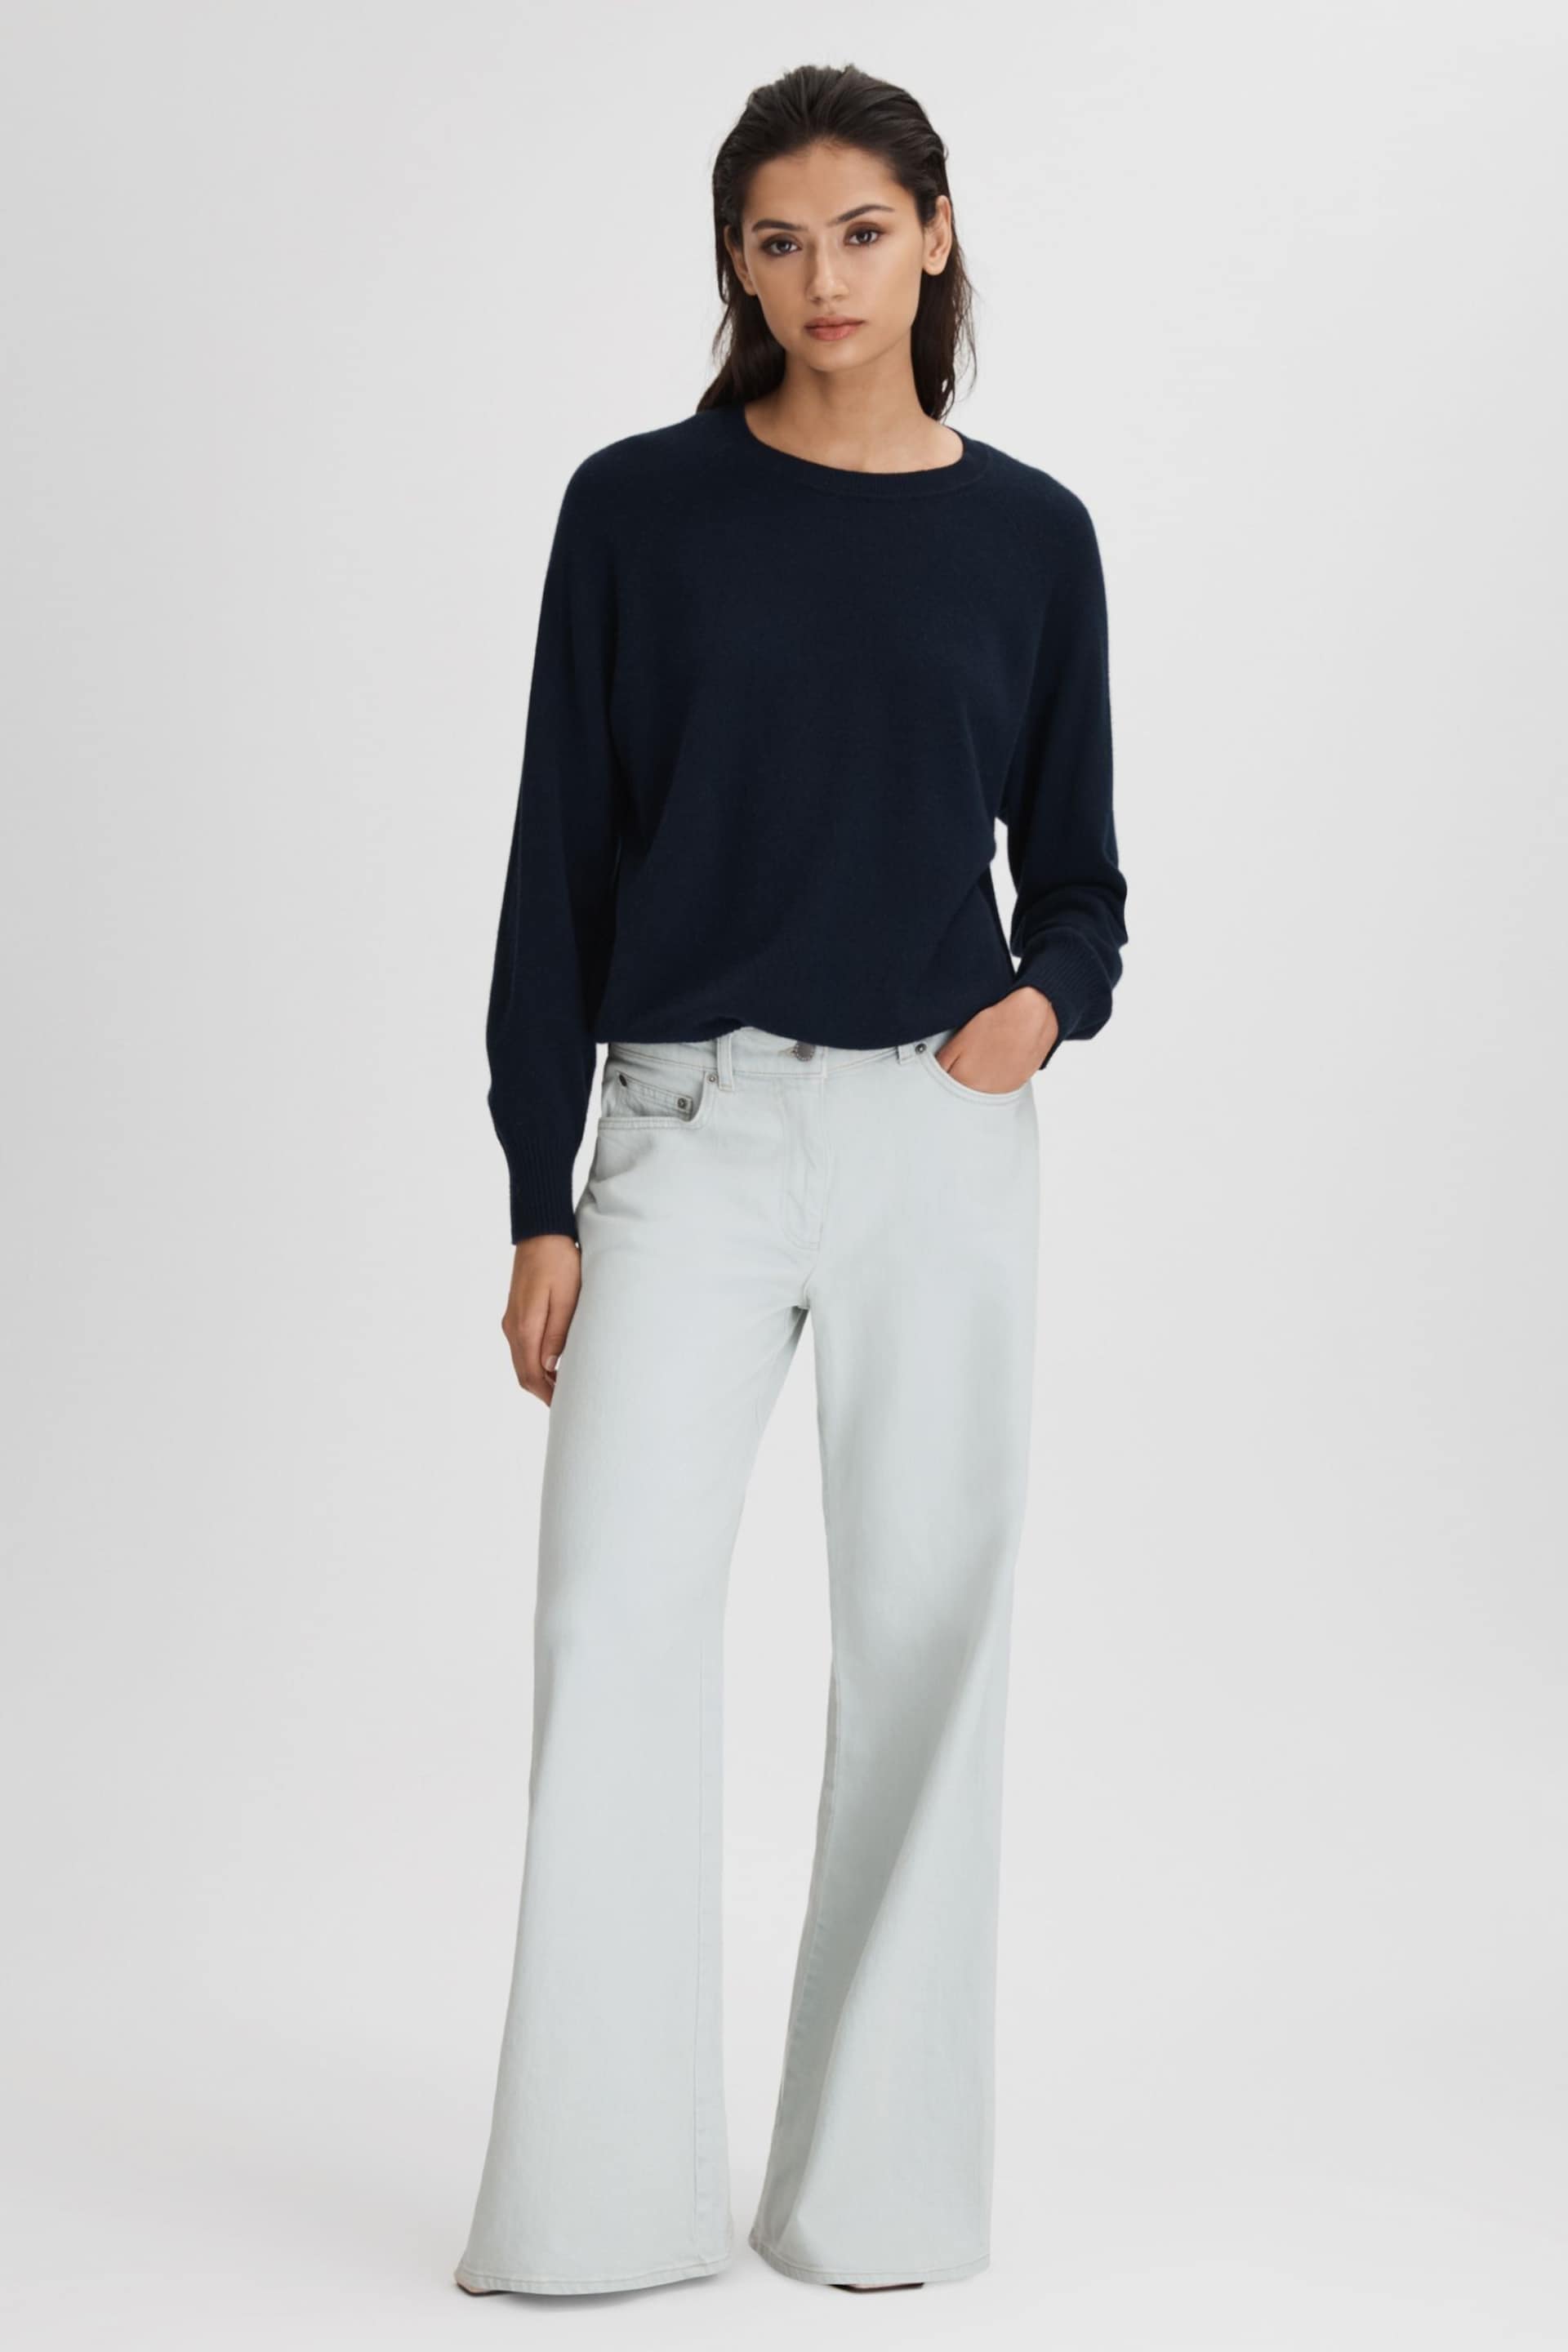 Reiss Light Blue Maize Flared Side Seam Jeans - Image 1 of 5